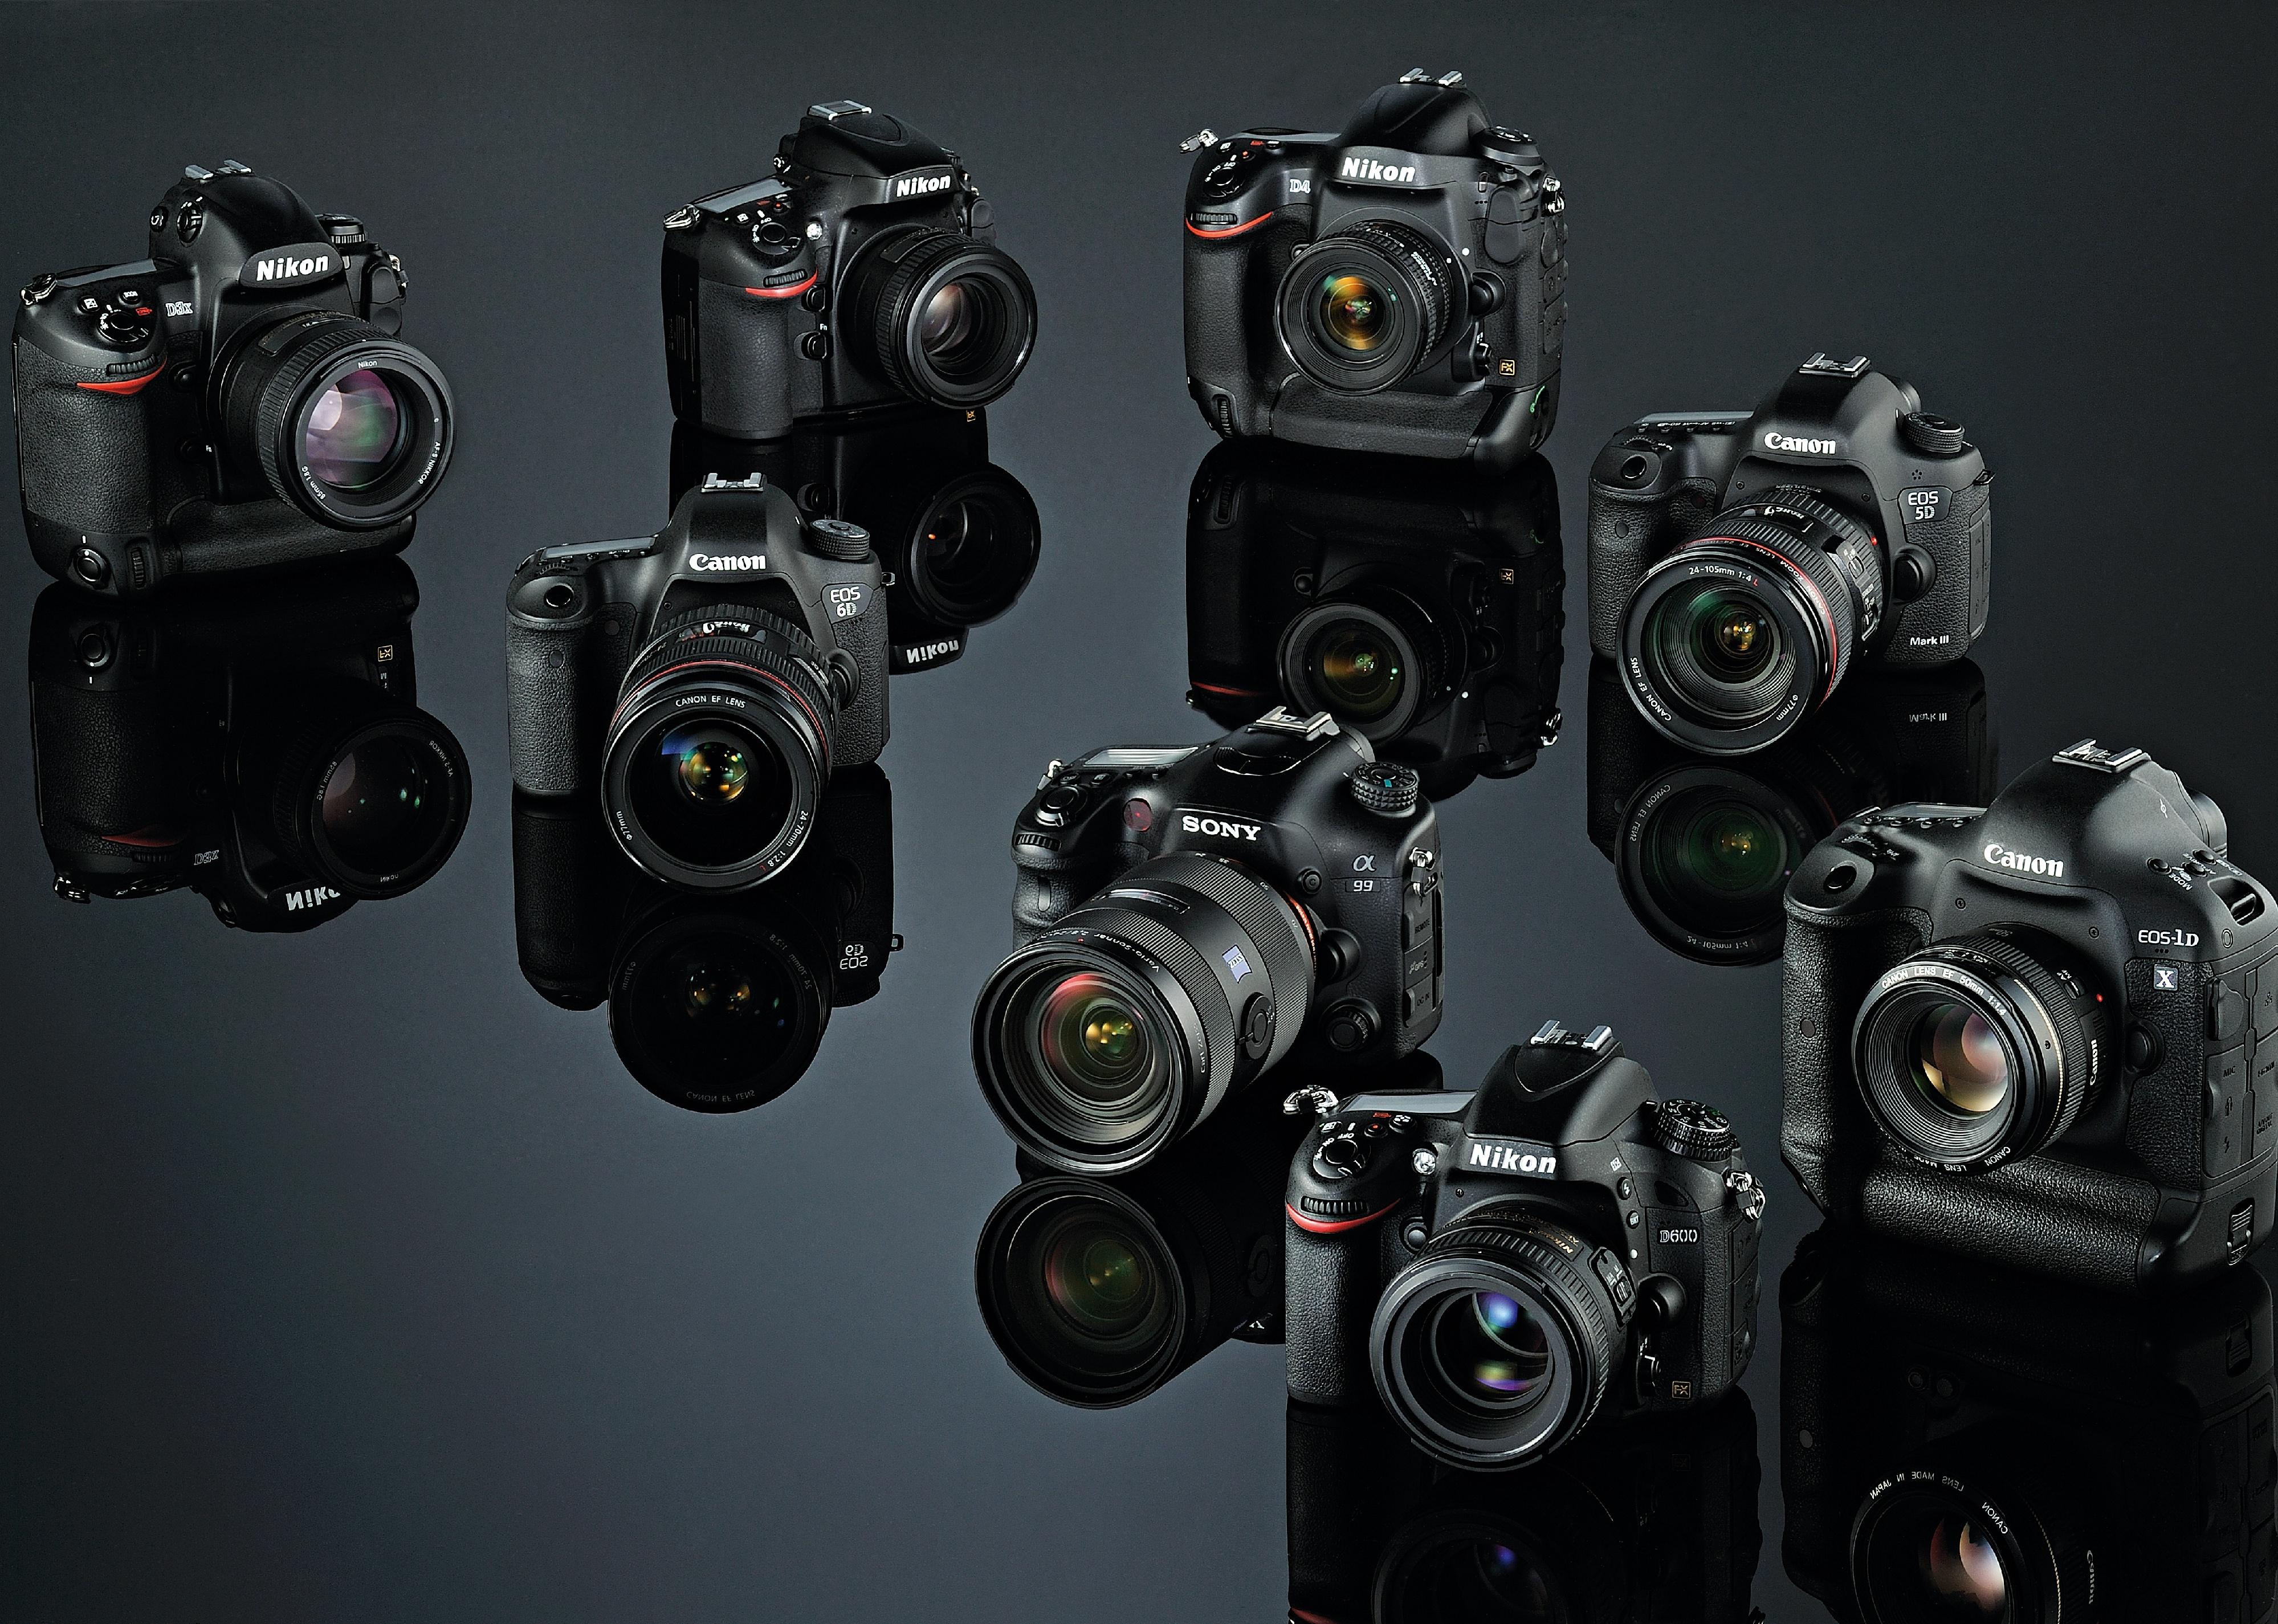 A selection of full-frame digital SLR's including Nikon, Canon and Sony brands.